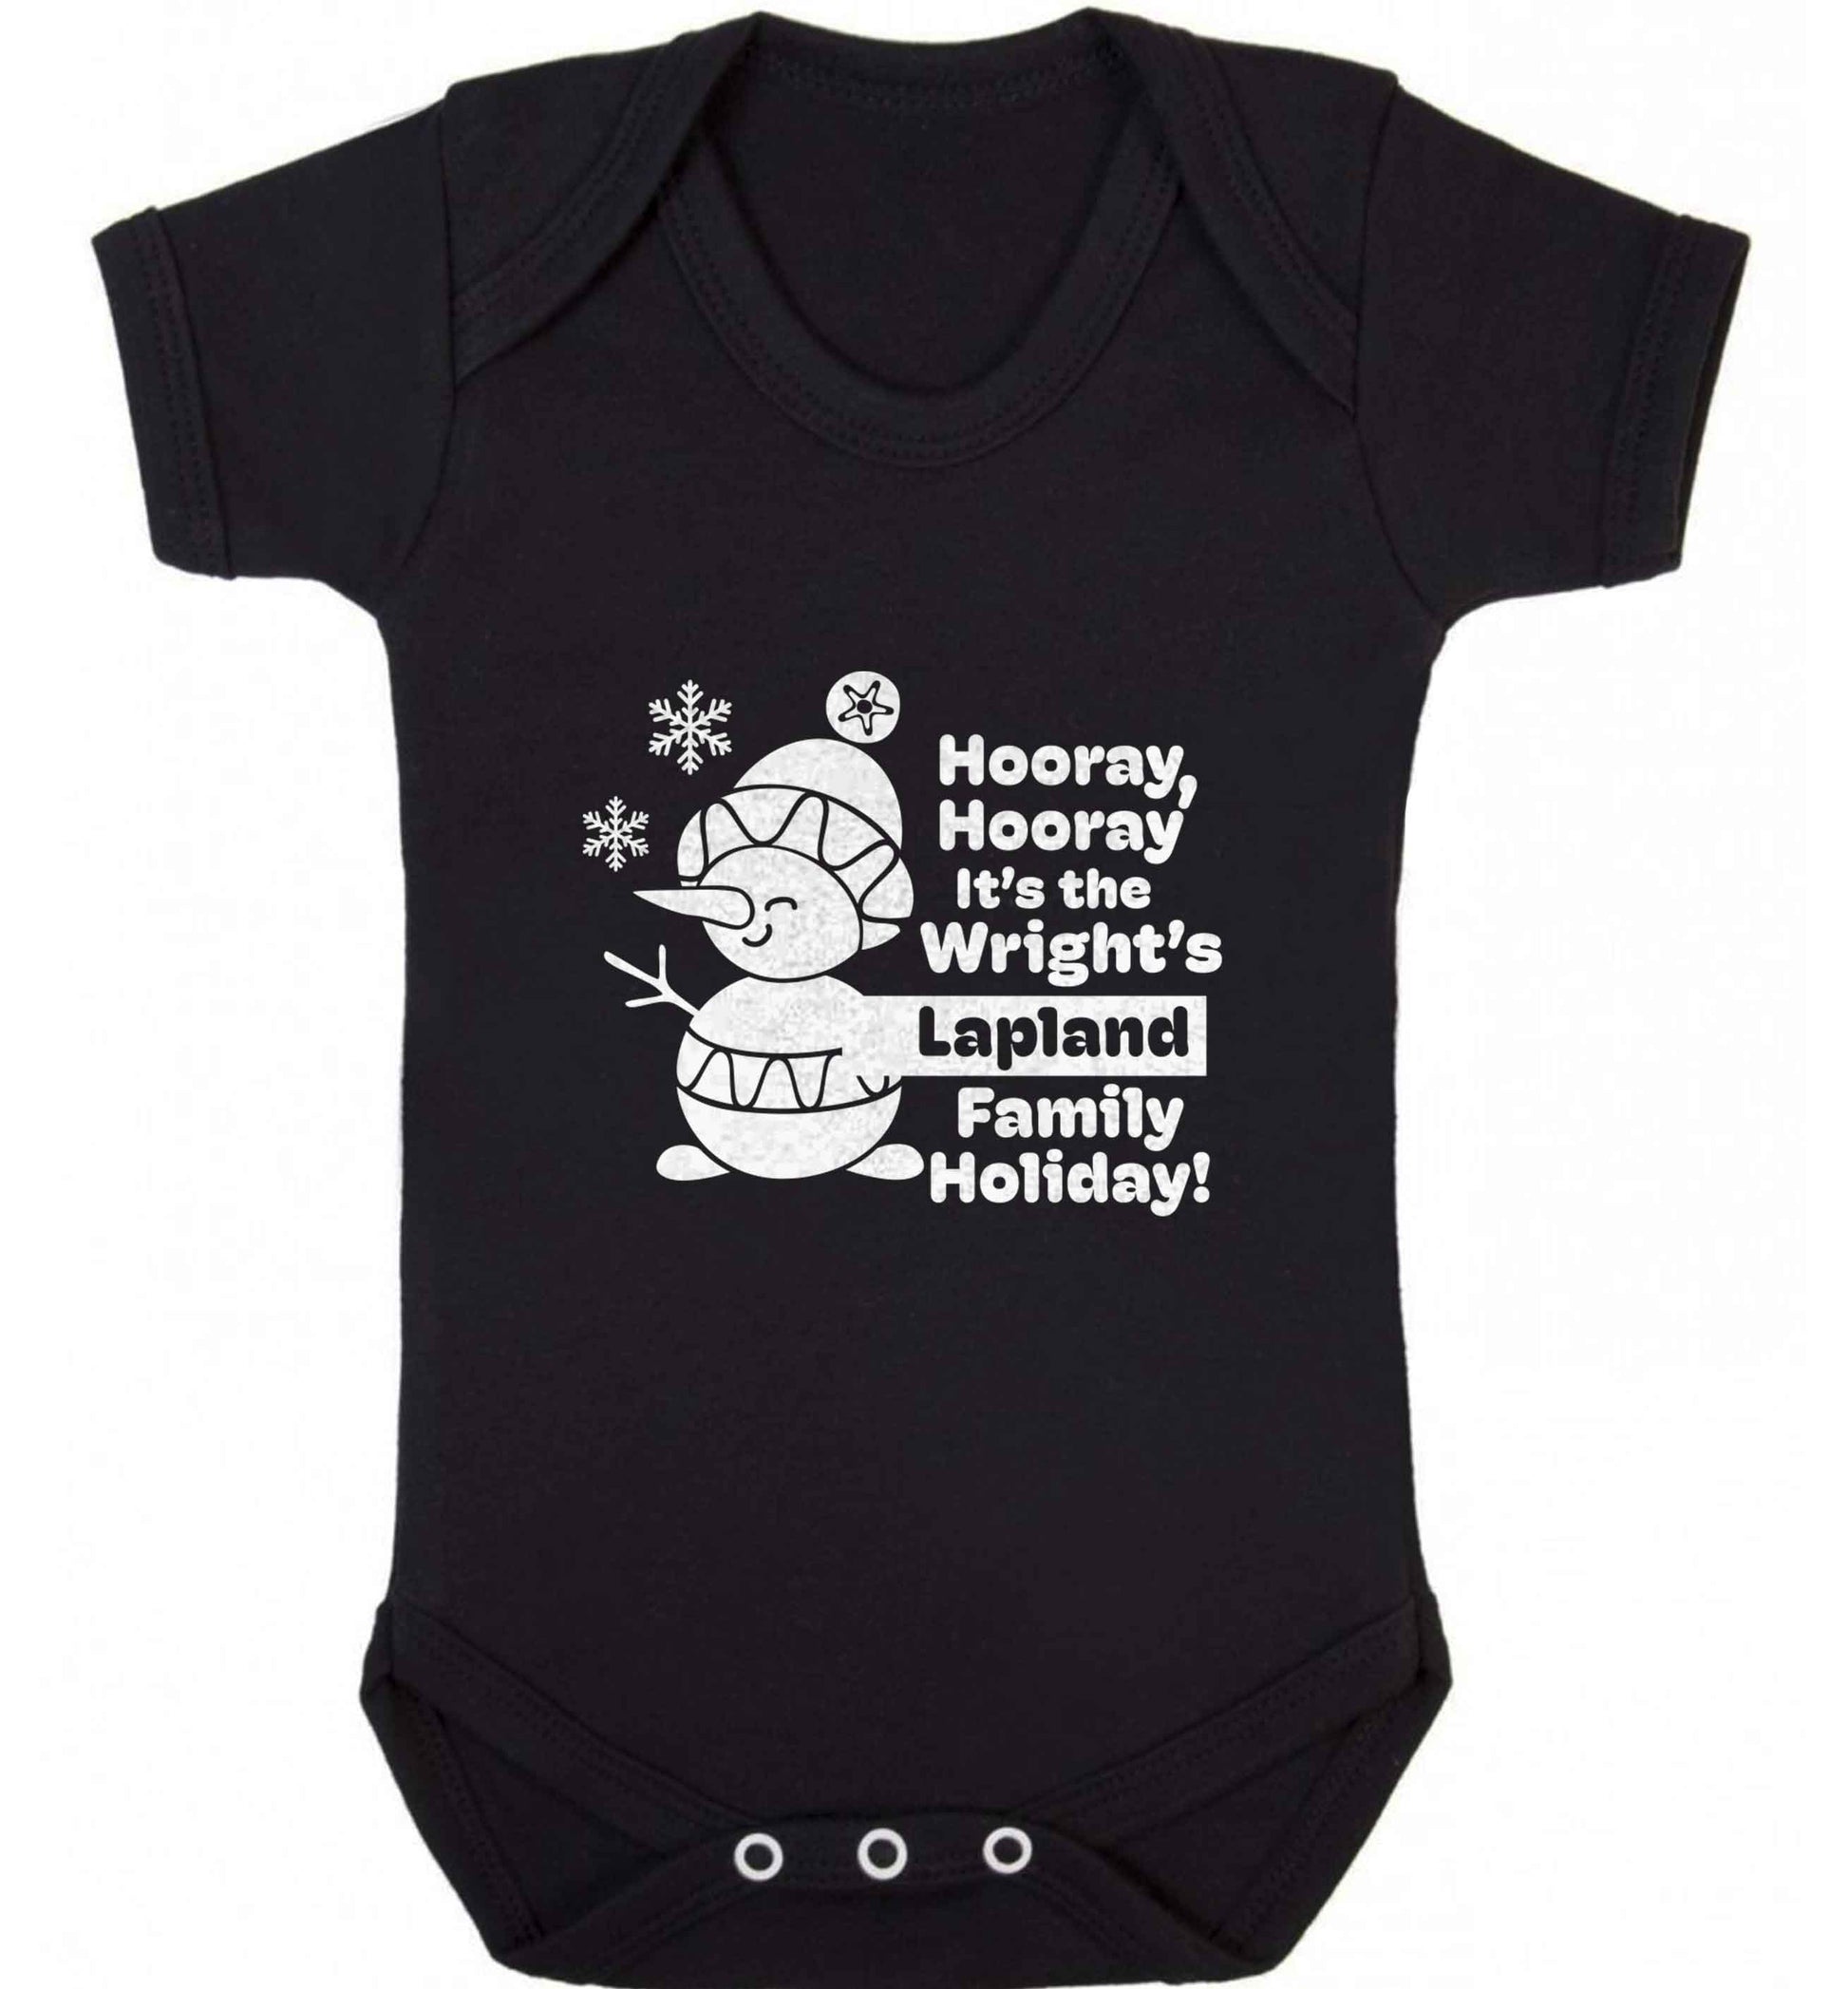 Hooray it's the personalised Lapland holiday! baby vest black 18-24 months